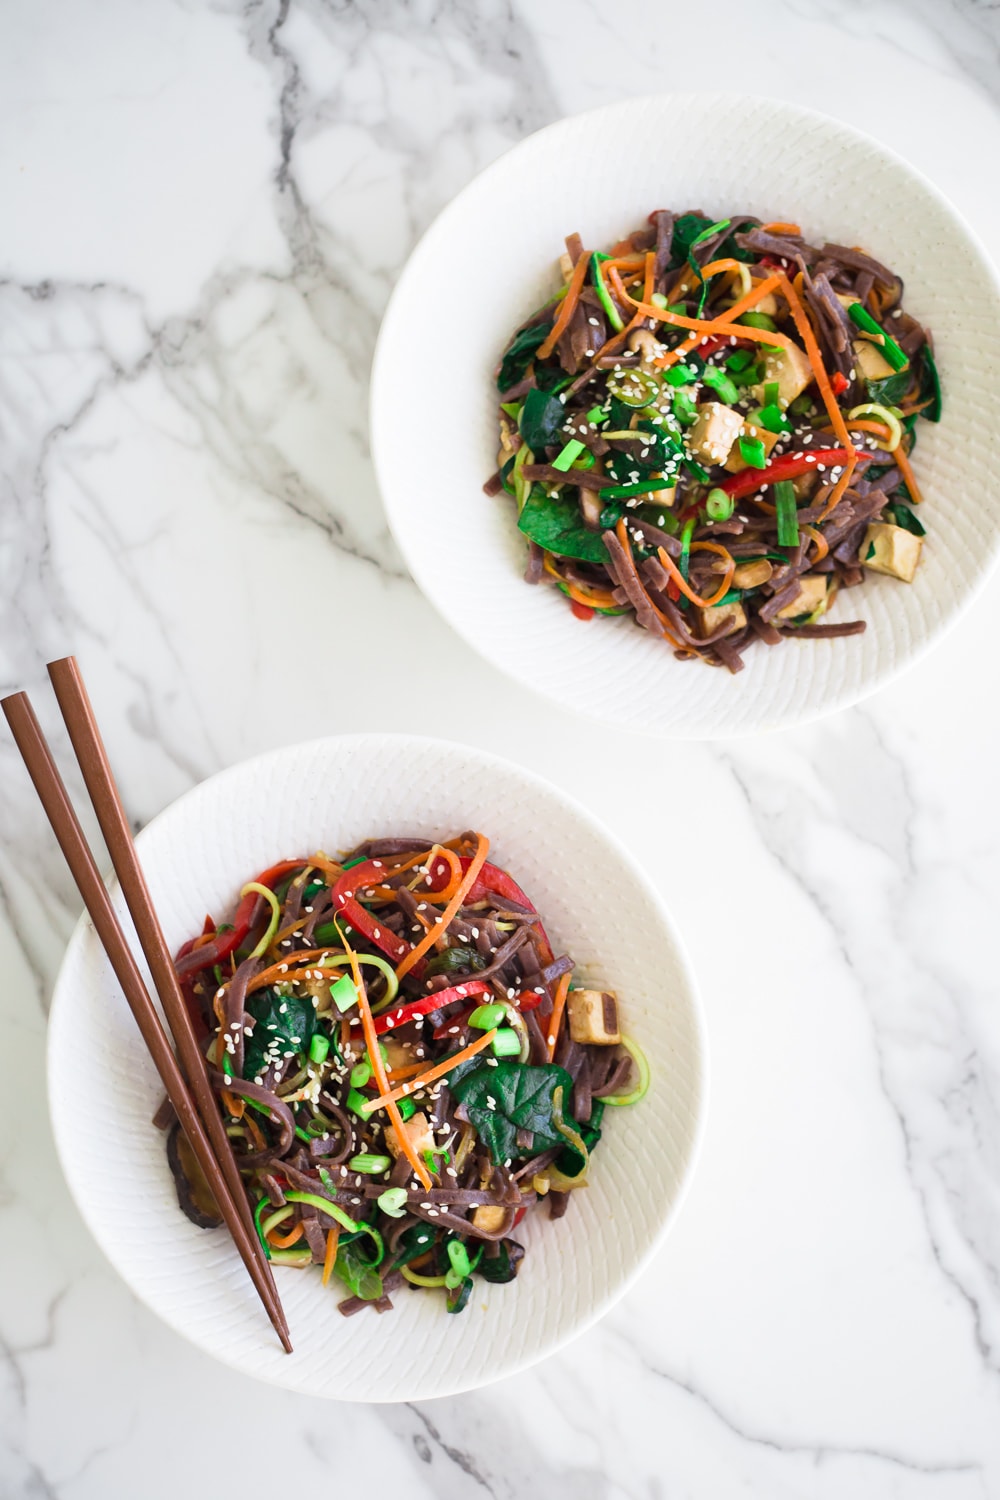 Healthy Vegan Korean Japchae Noodles - A Simple Dish loaded with Vegetables and Zucchini Noodles that is ready in under 30 minutes. #vegan #japchae #korean #noodles #recipe #asian #quick